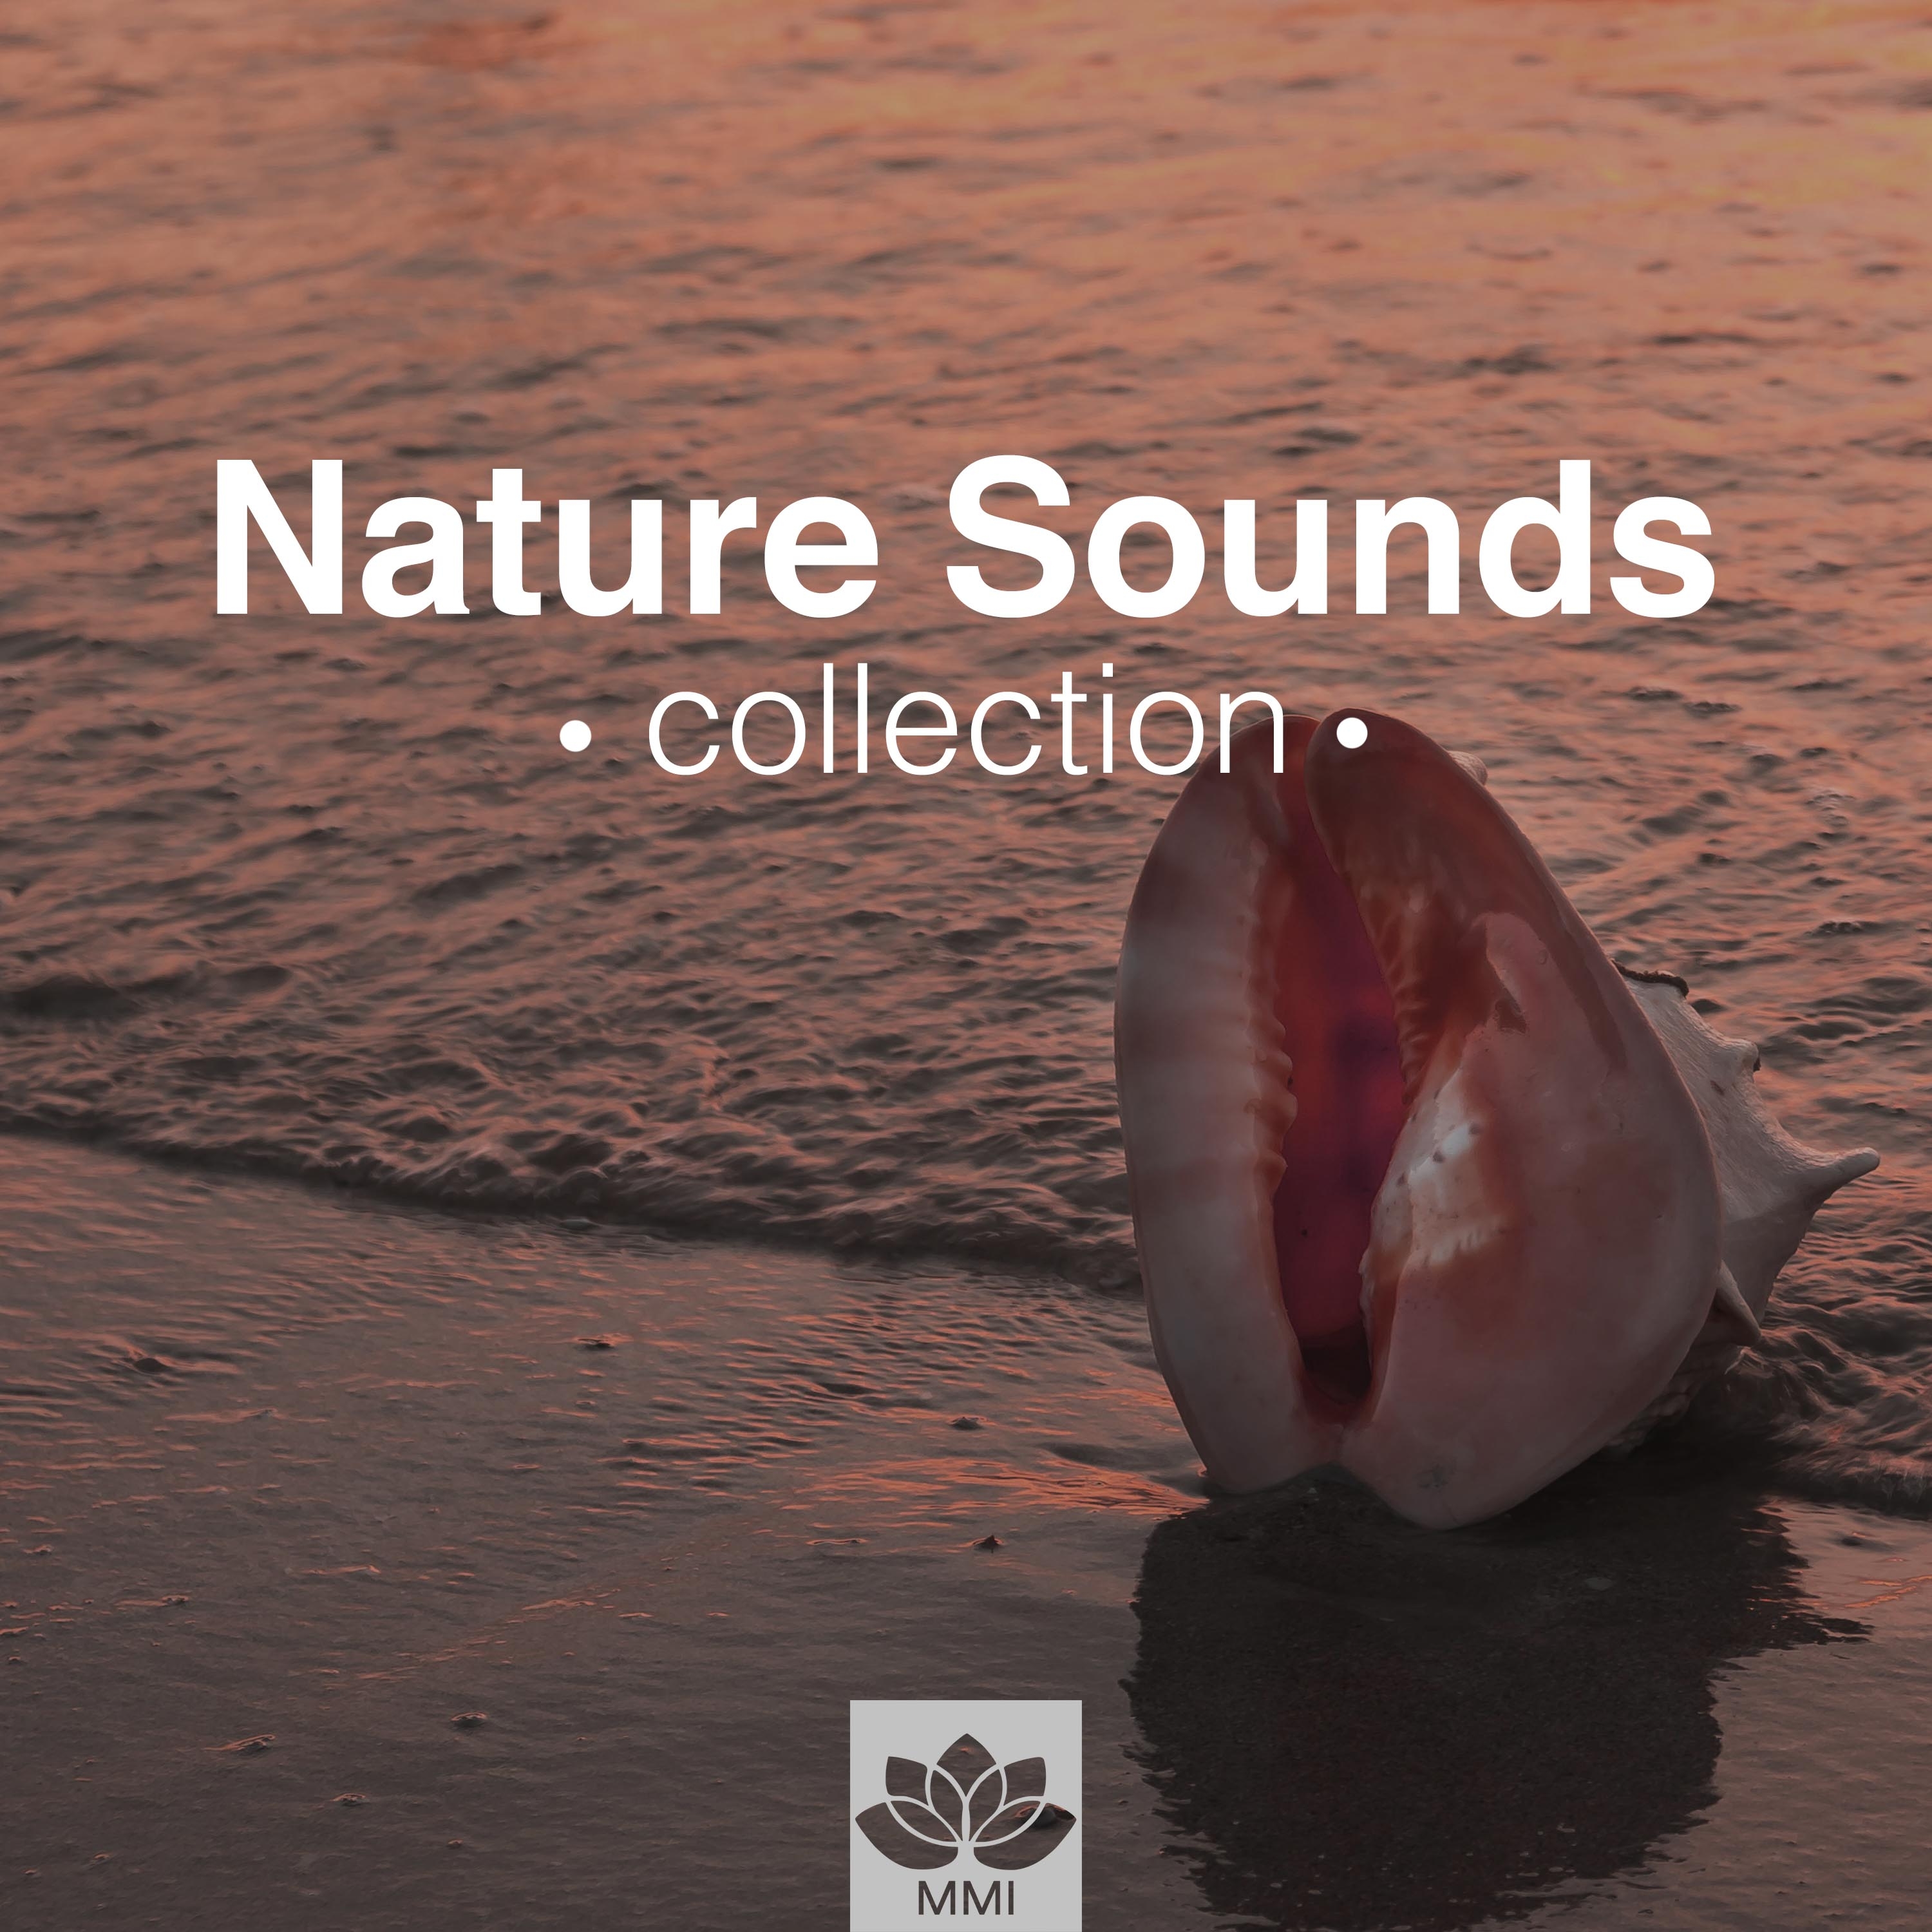 Nature Sounds Collection - Relaxation & Meditation Music for Sleep, Relax, Study, Find Peace